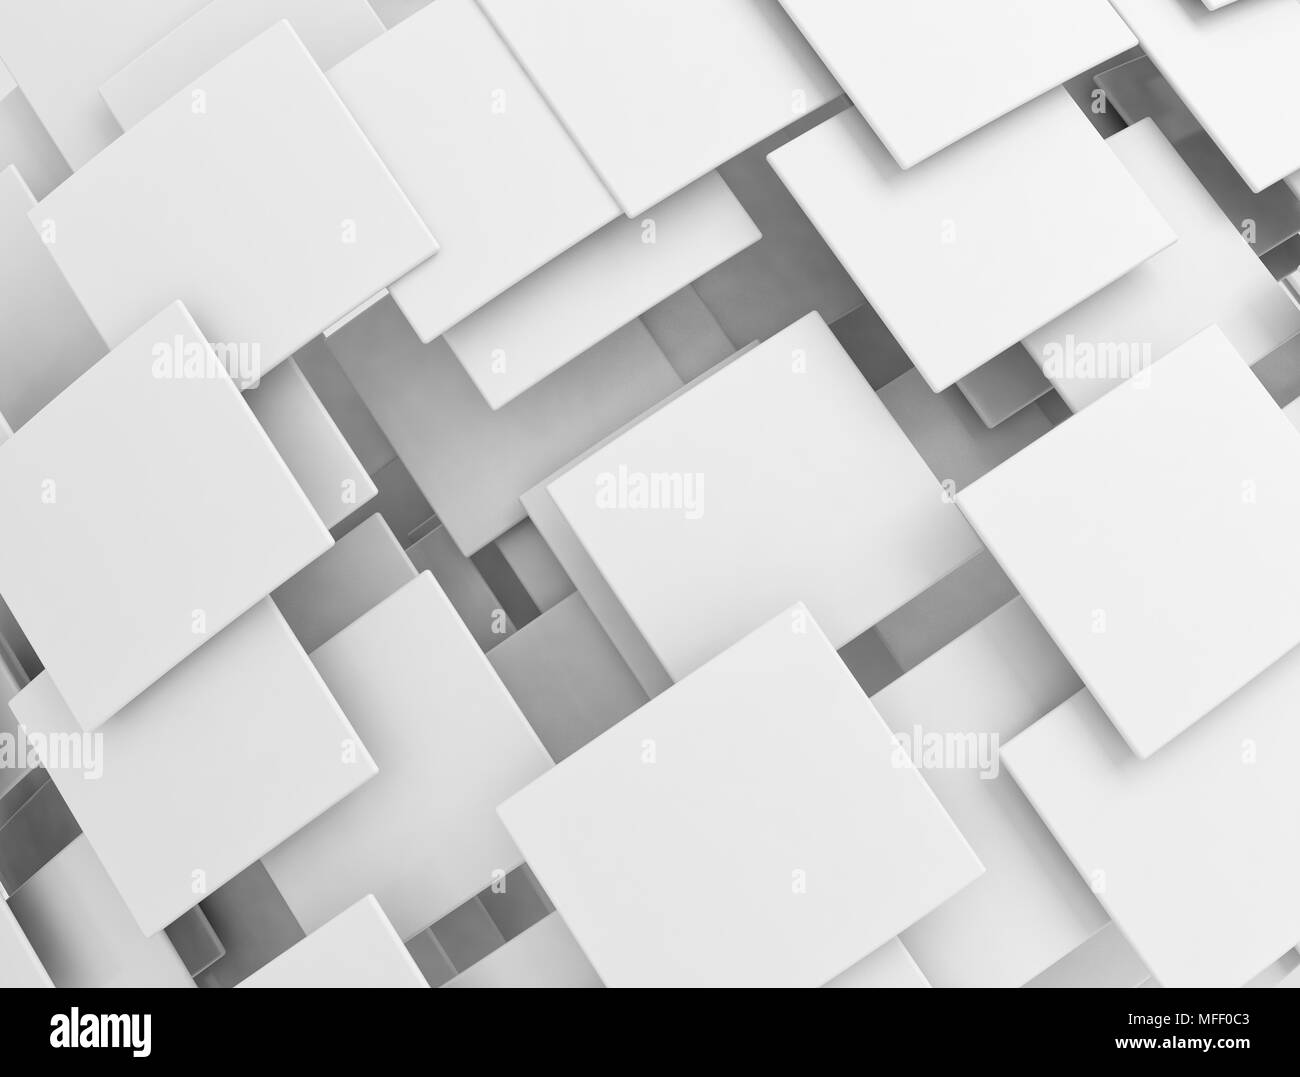 Overlapping white squares Stock Photo